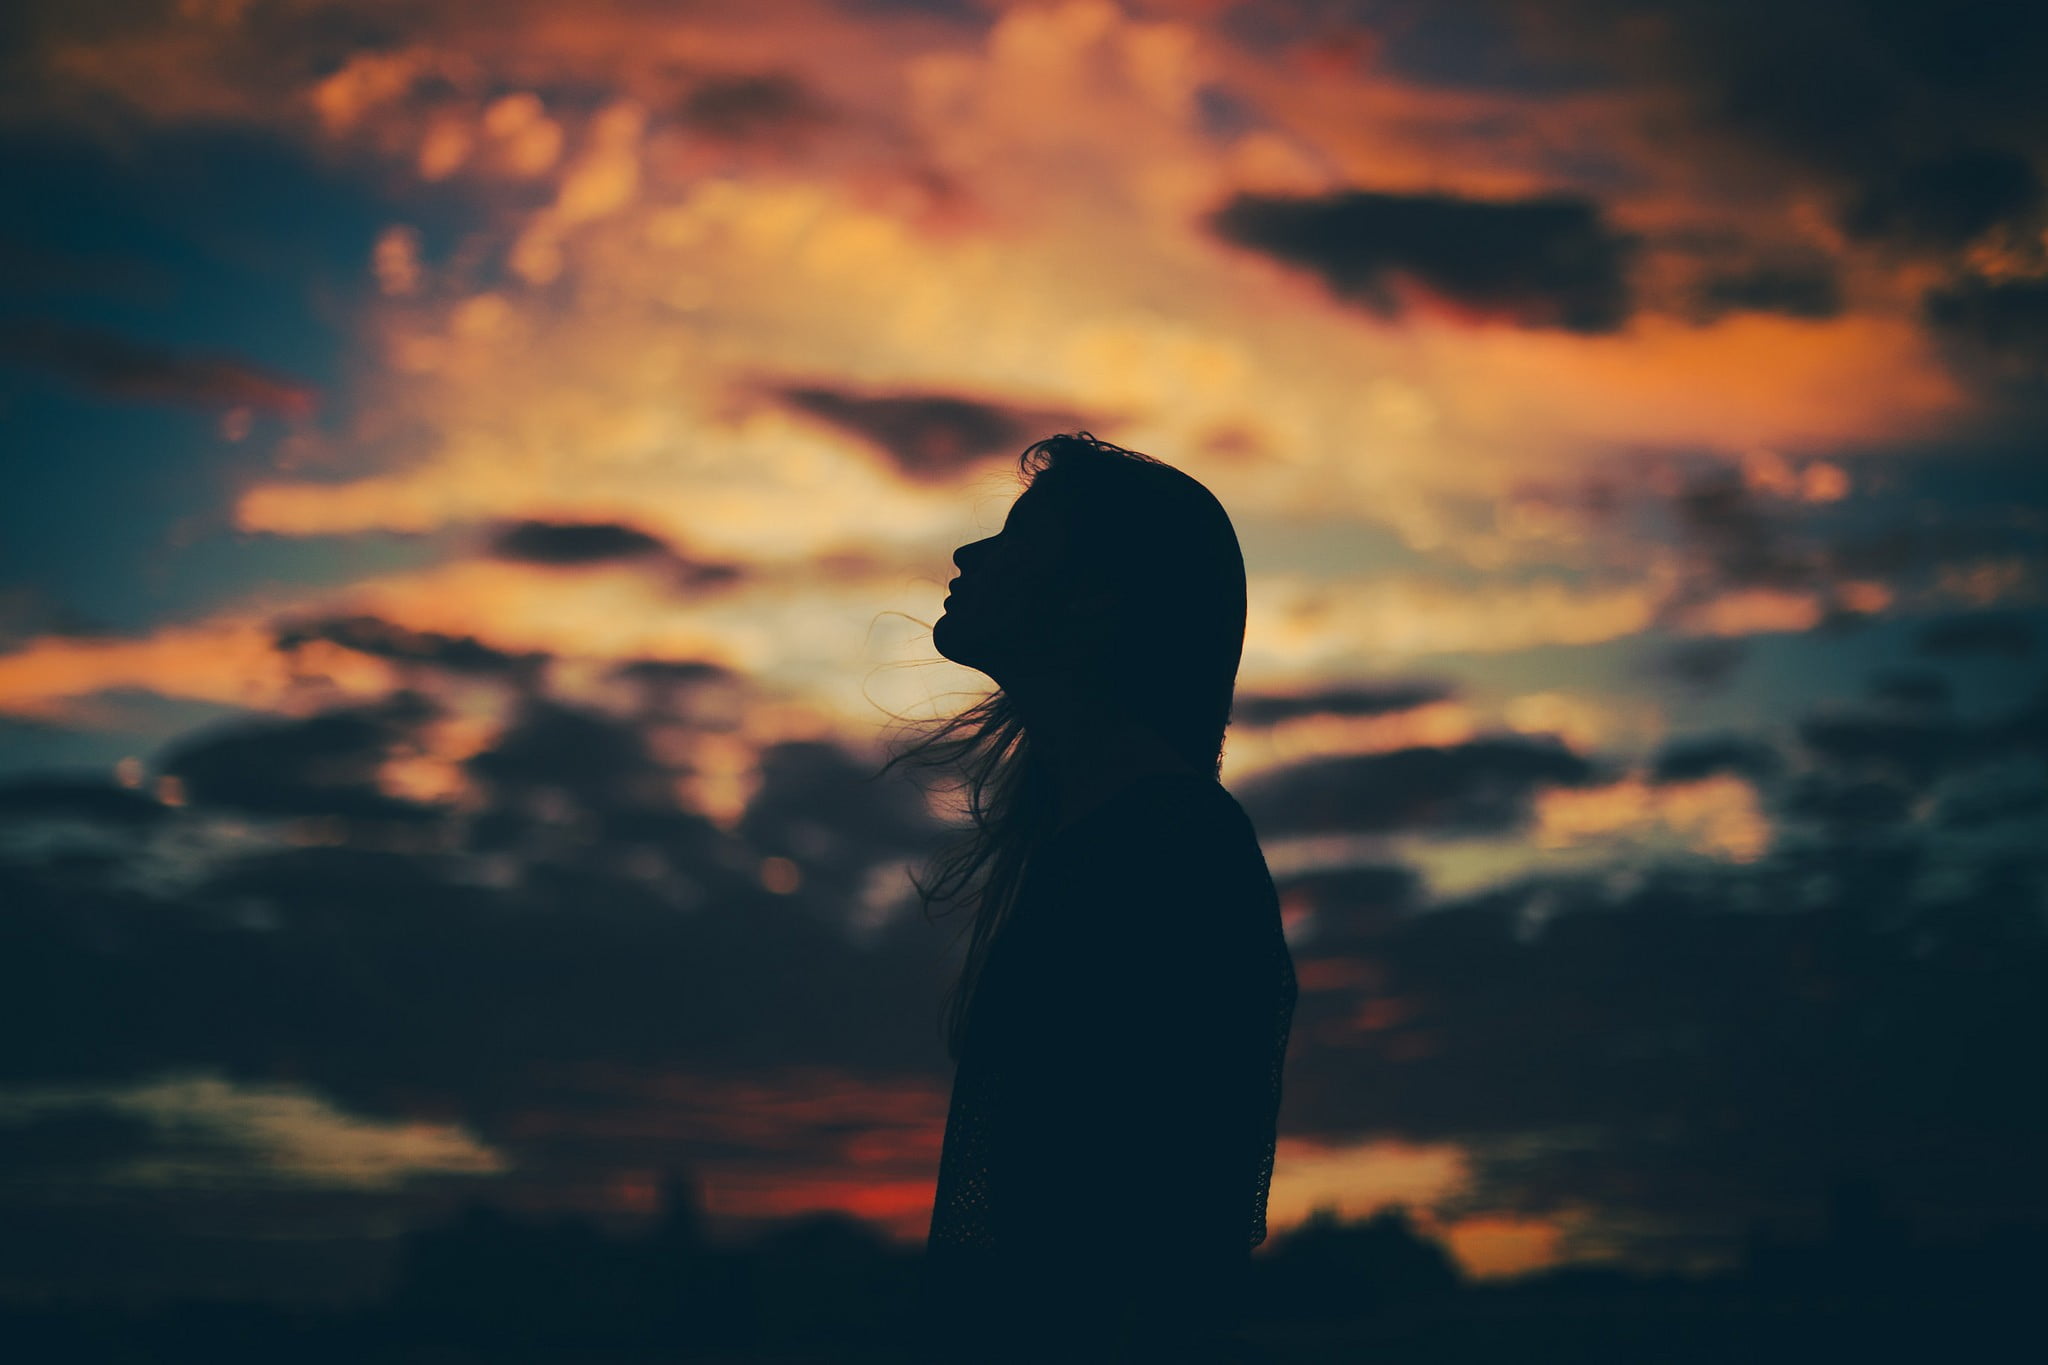 women, windy, silhouette, clouds, nature, sunset, side view